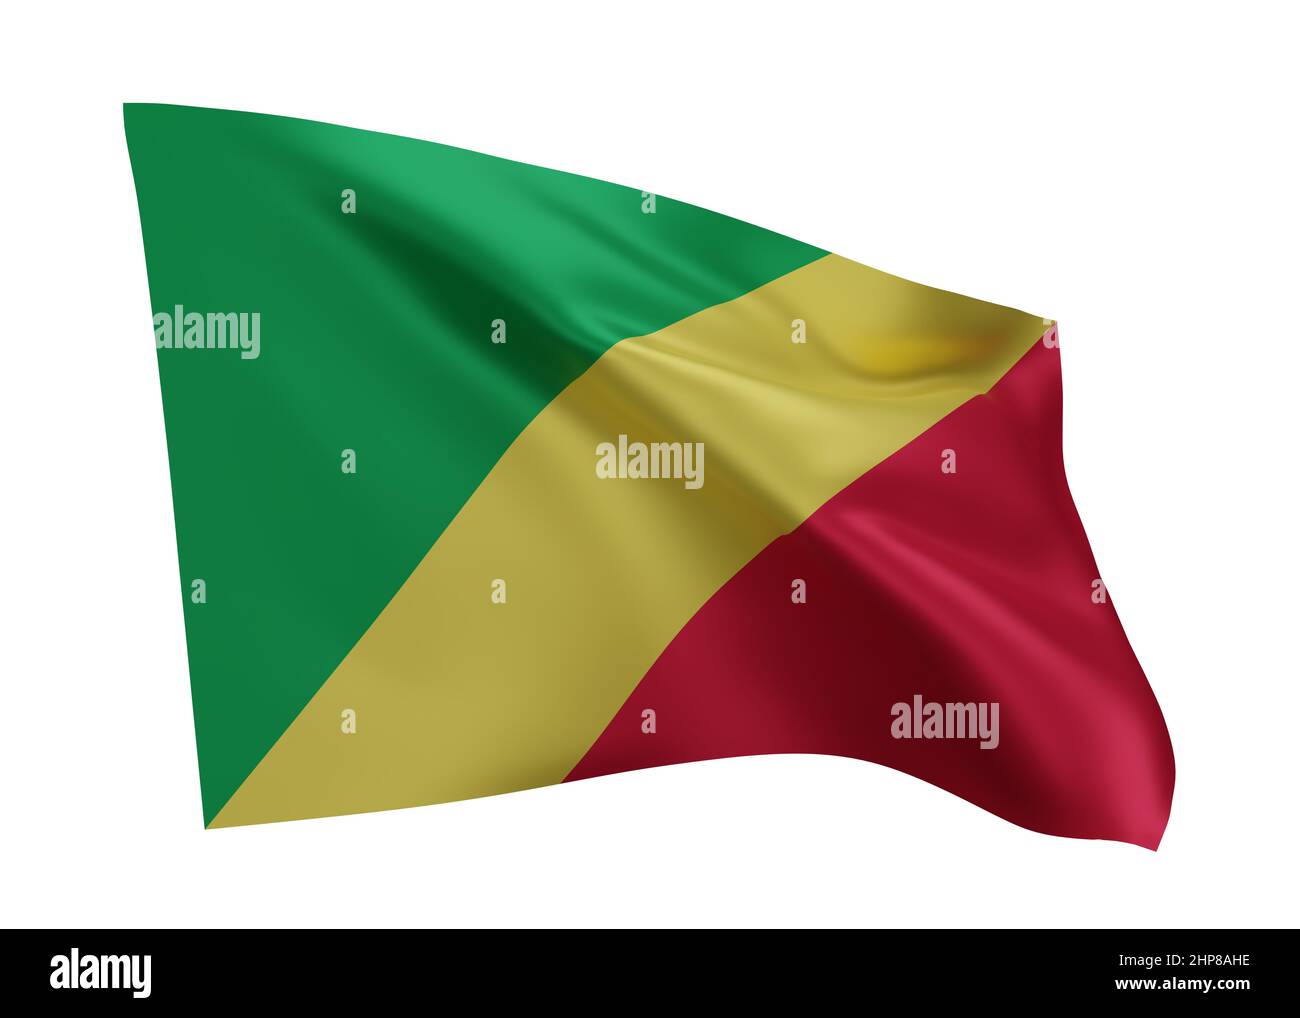 3d illustration flag of Republic of the Congo. Congo high resolution flag isolated against white background. 3d rendering Stock Photo